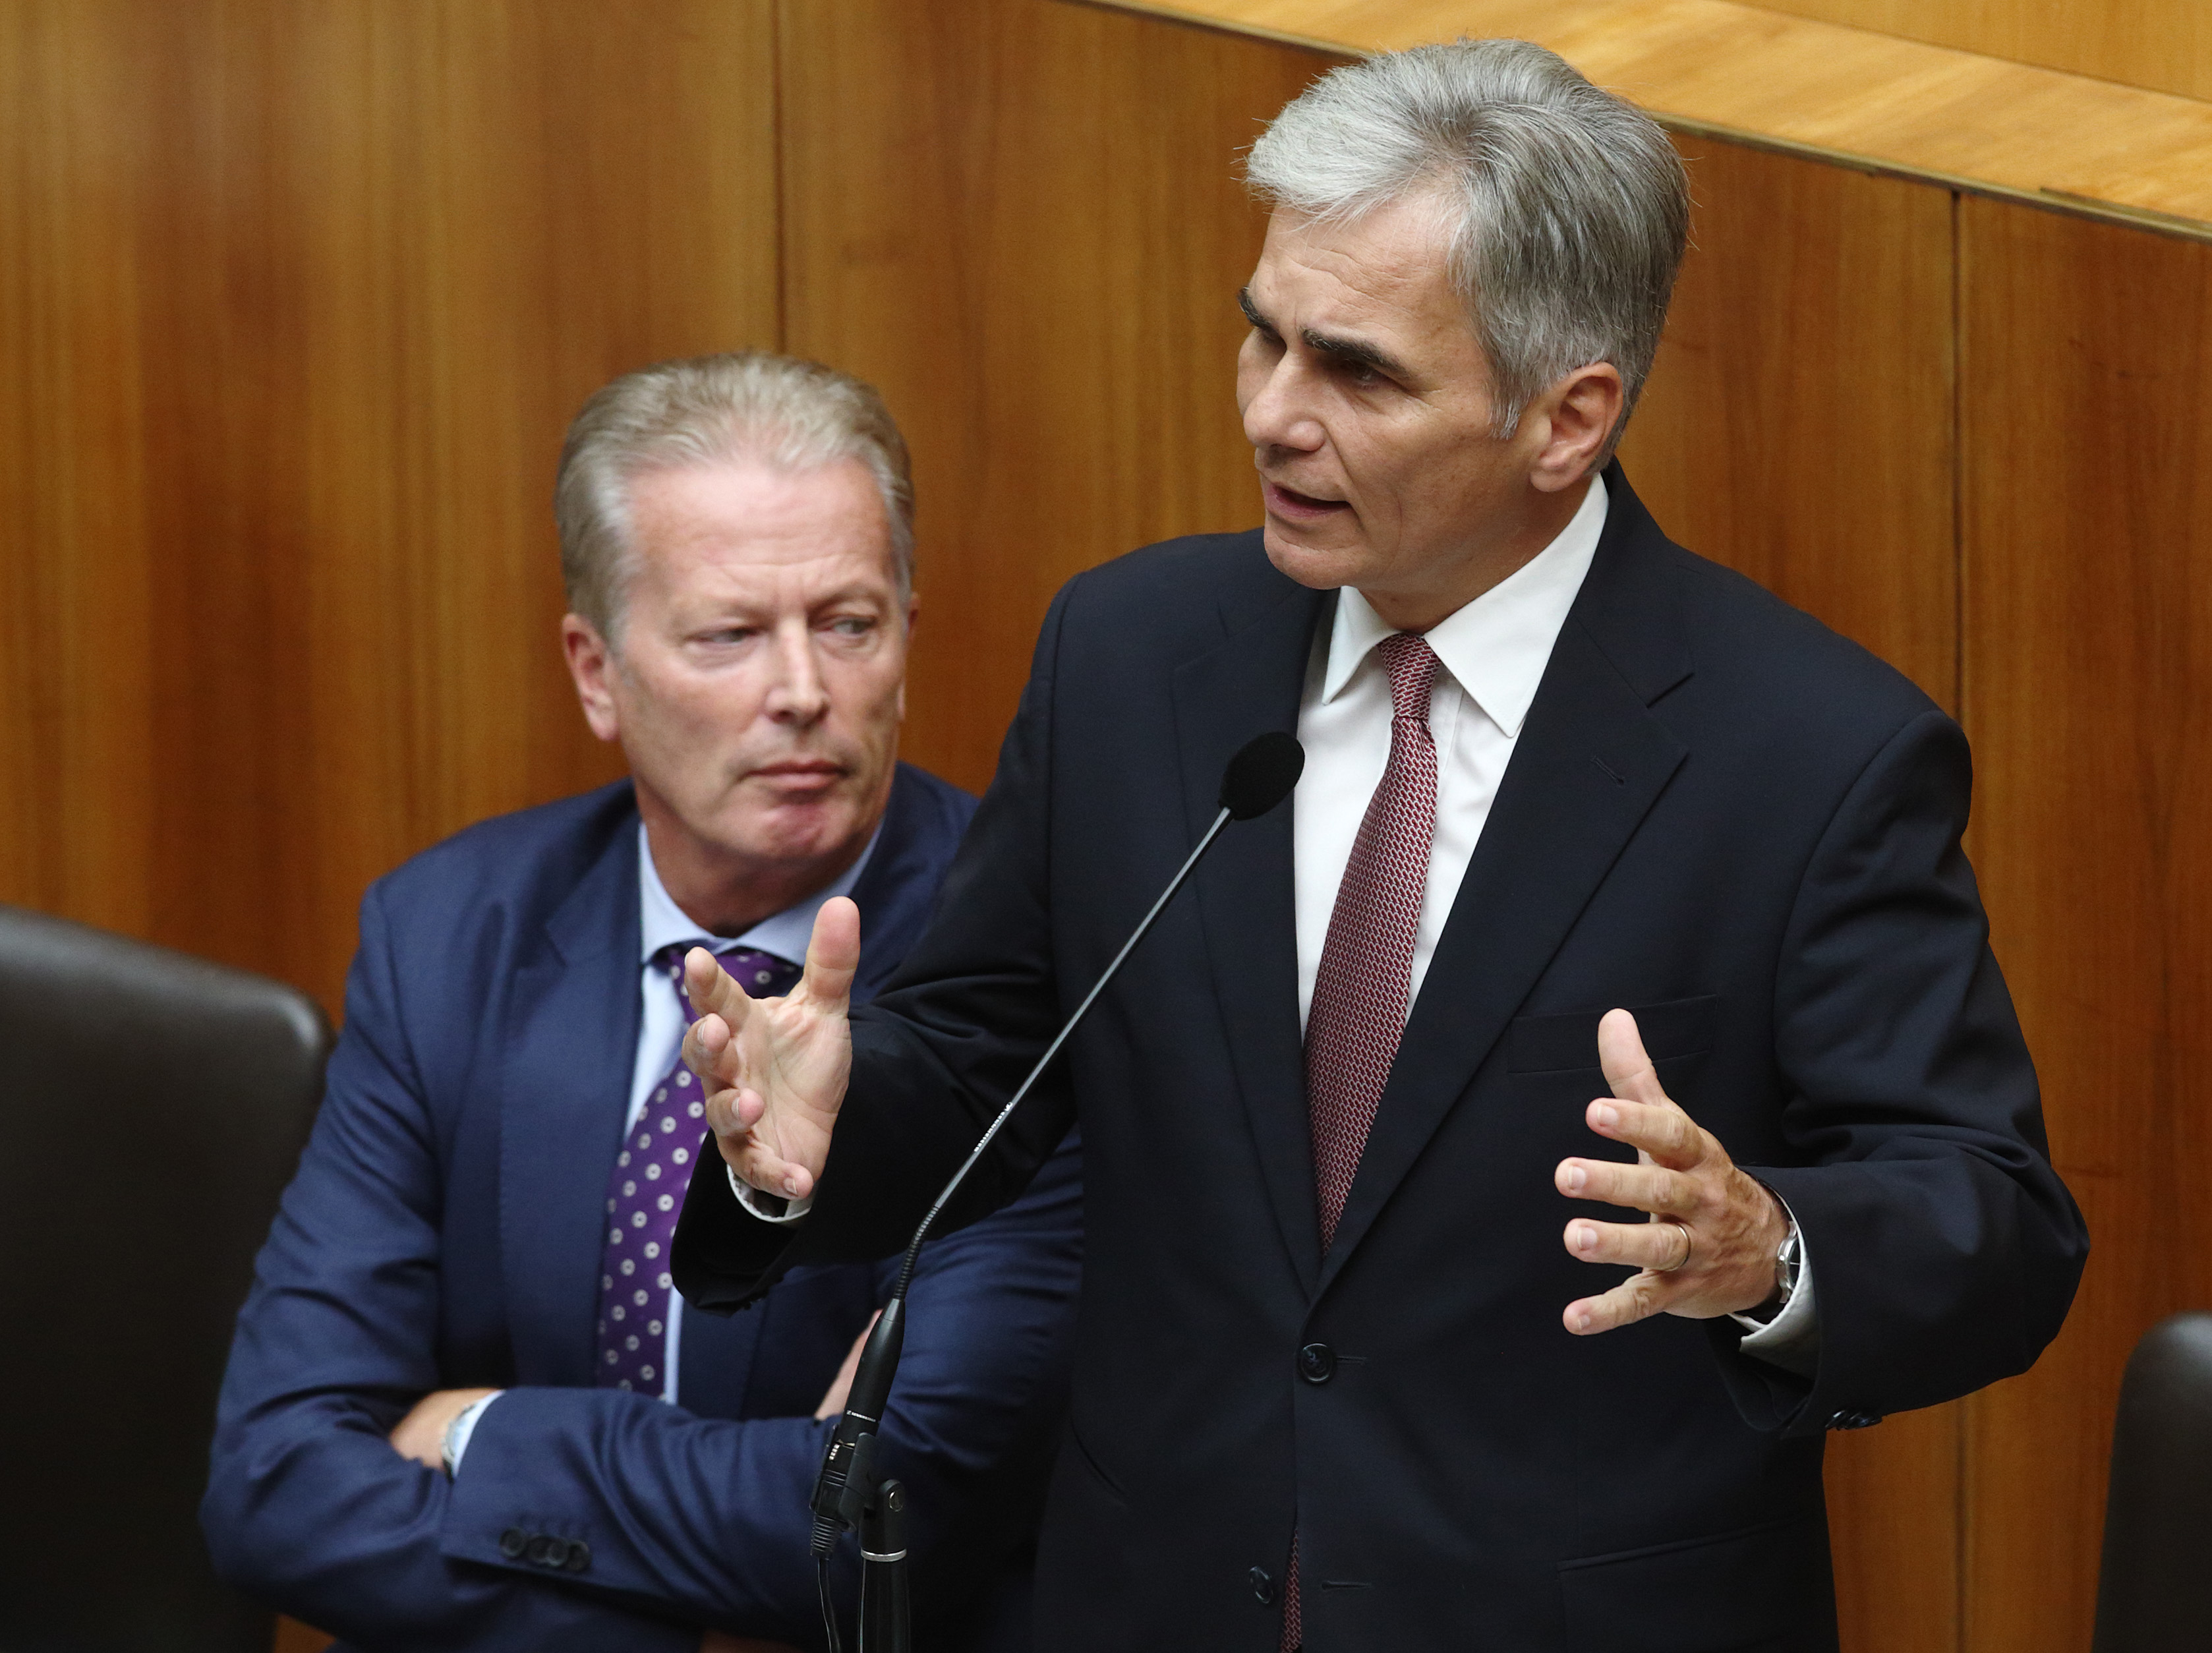 Austrian Chancellor Werner Faymann (R) talks next to Vice Chancellor Reinhold Mitterlehner during an extraordinary session of the parliament on migration policy in Vienna on Sept. 1, 2015. (Heinz-Peter Bader—Reuters)